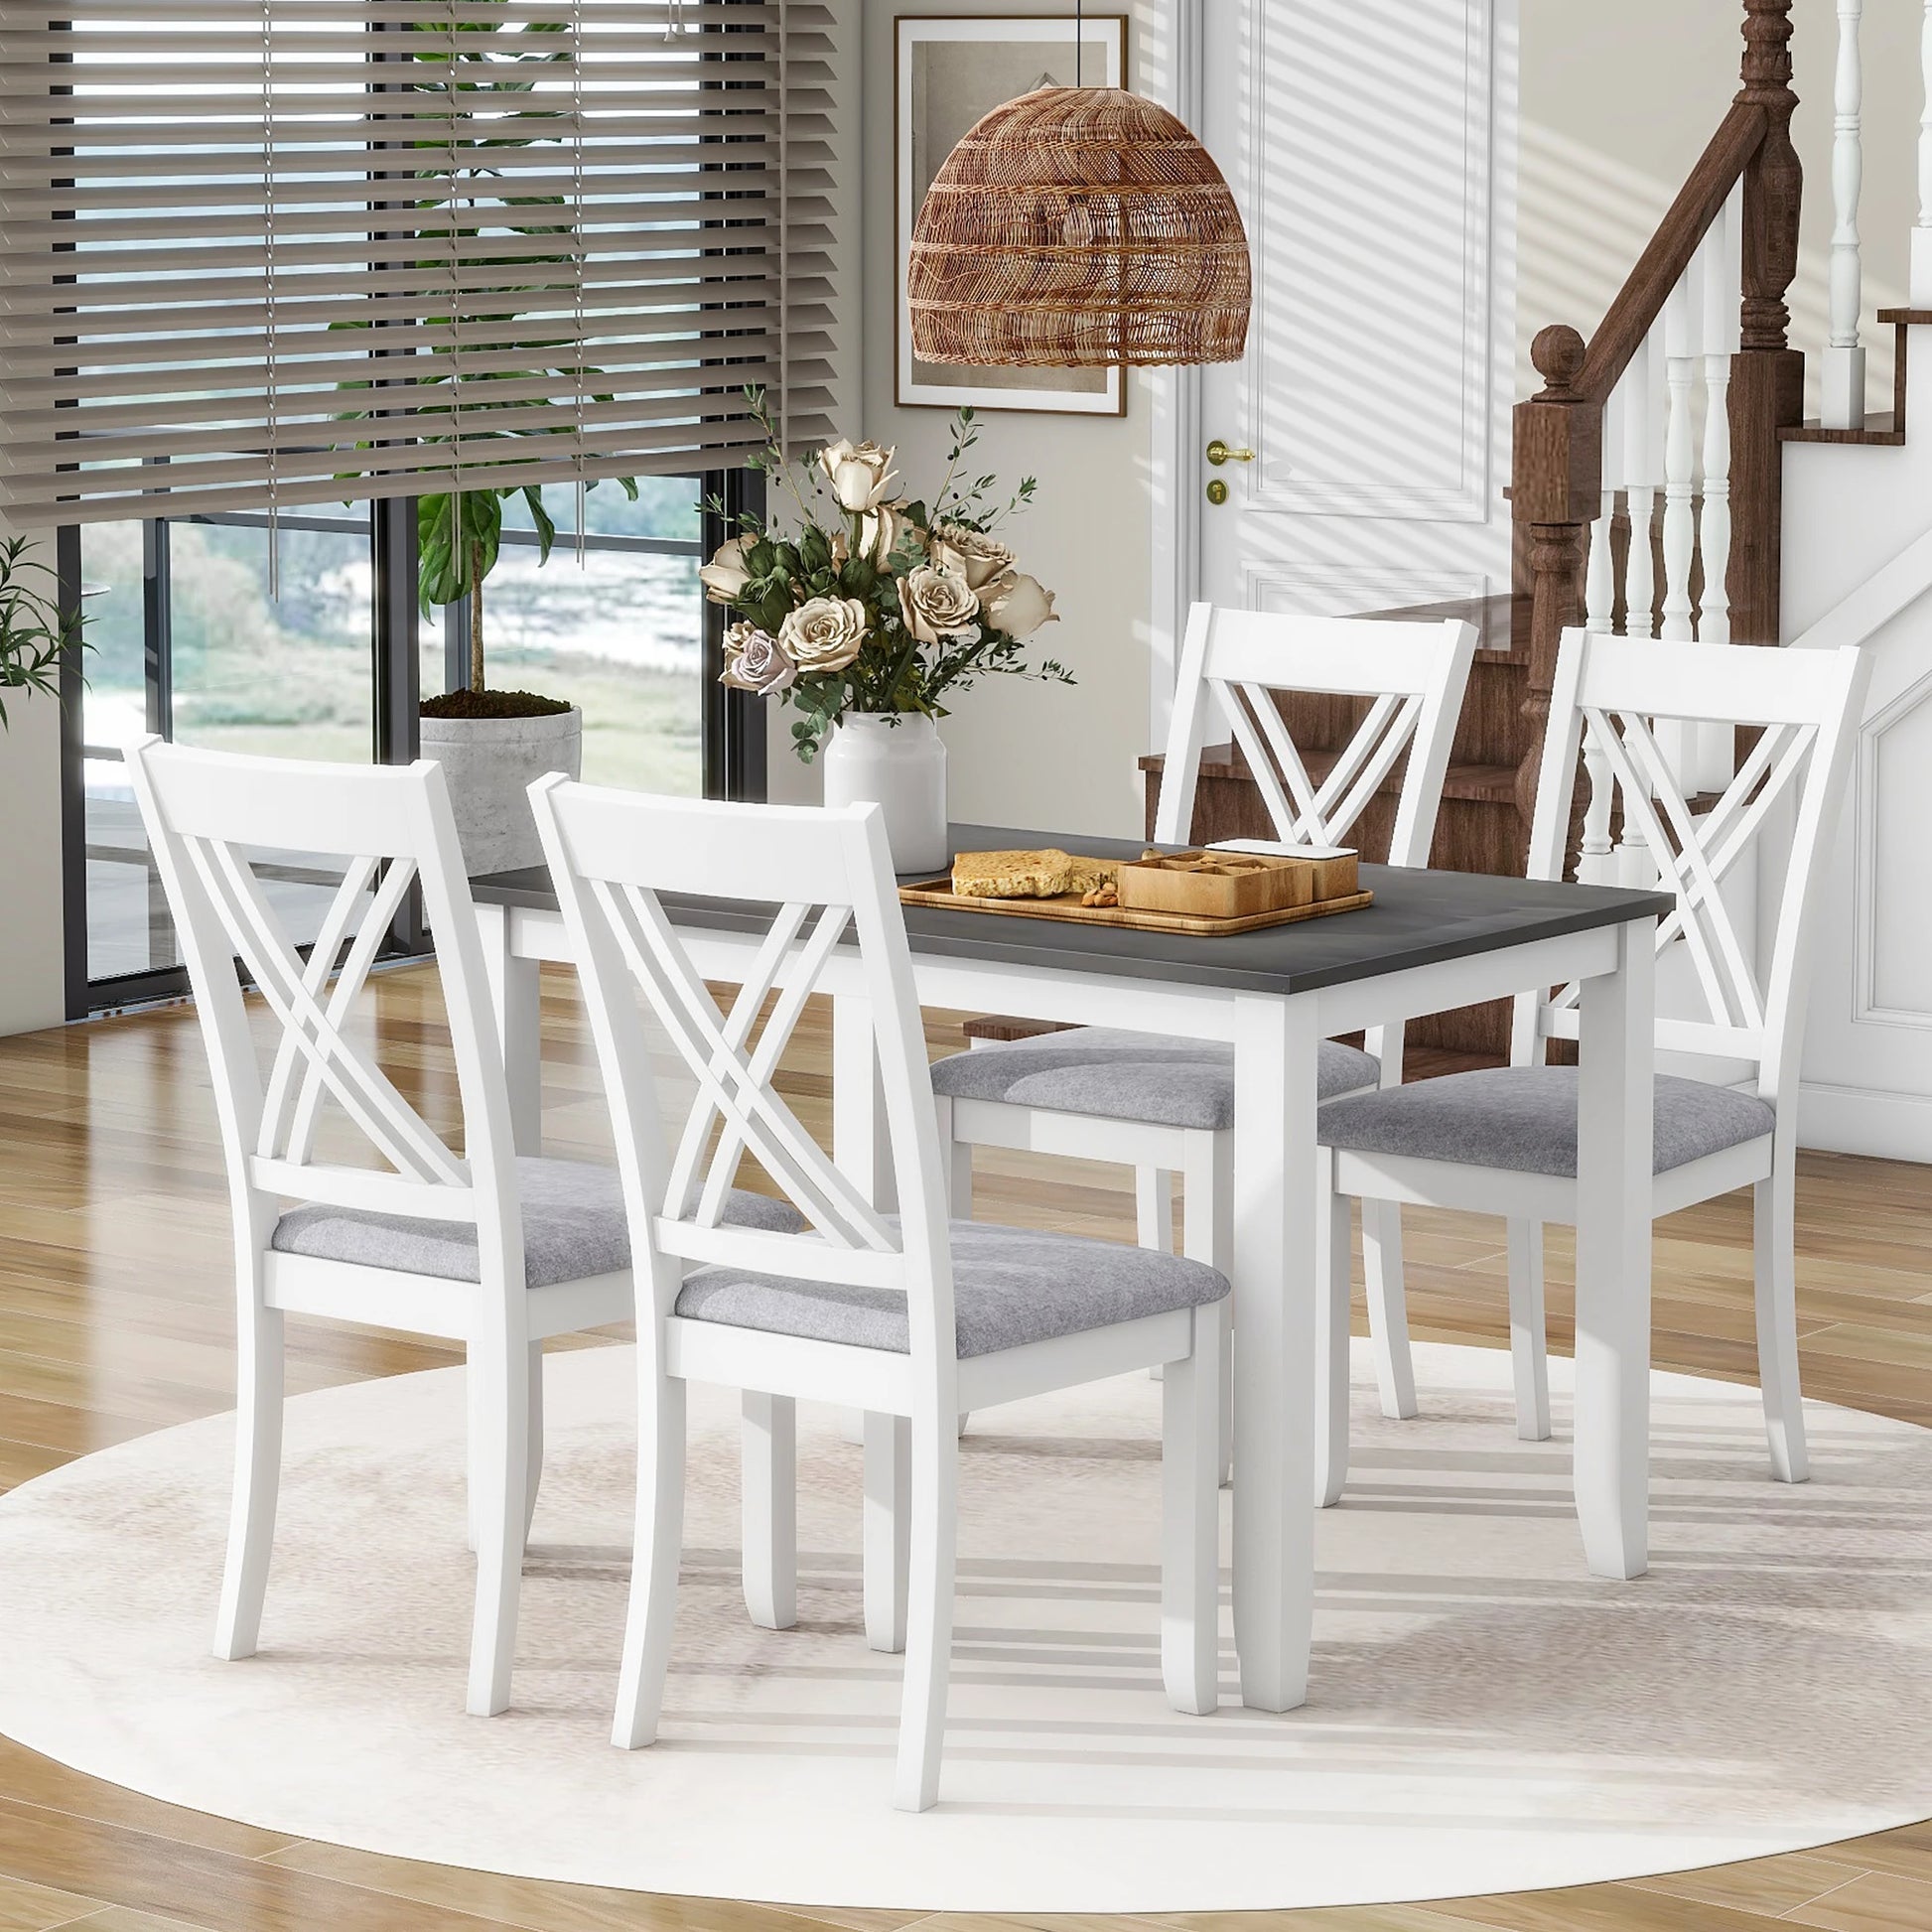 Chic Rustic Minimalist Wood 5-Piece Dining Table Set with 4 X-Back Chairs - Perfect for Small Spaces ShopOnlyDeal